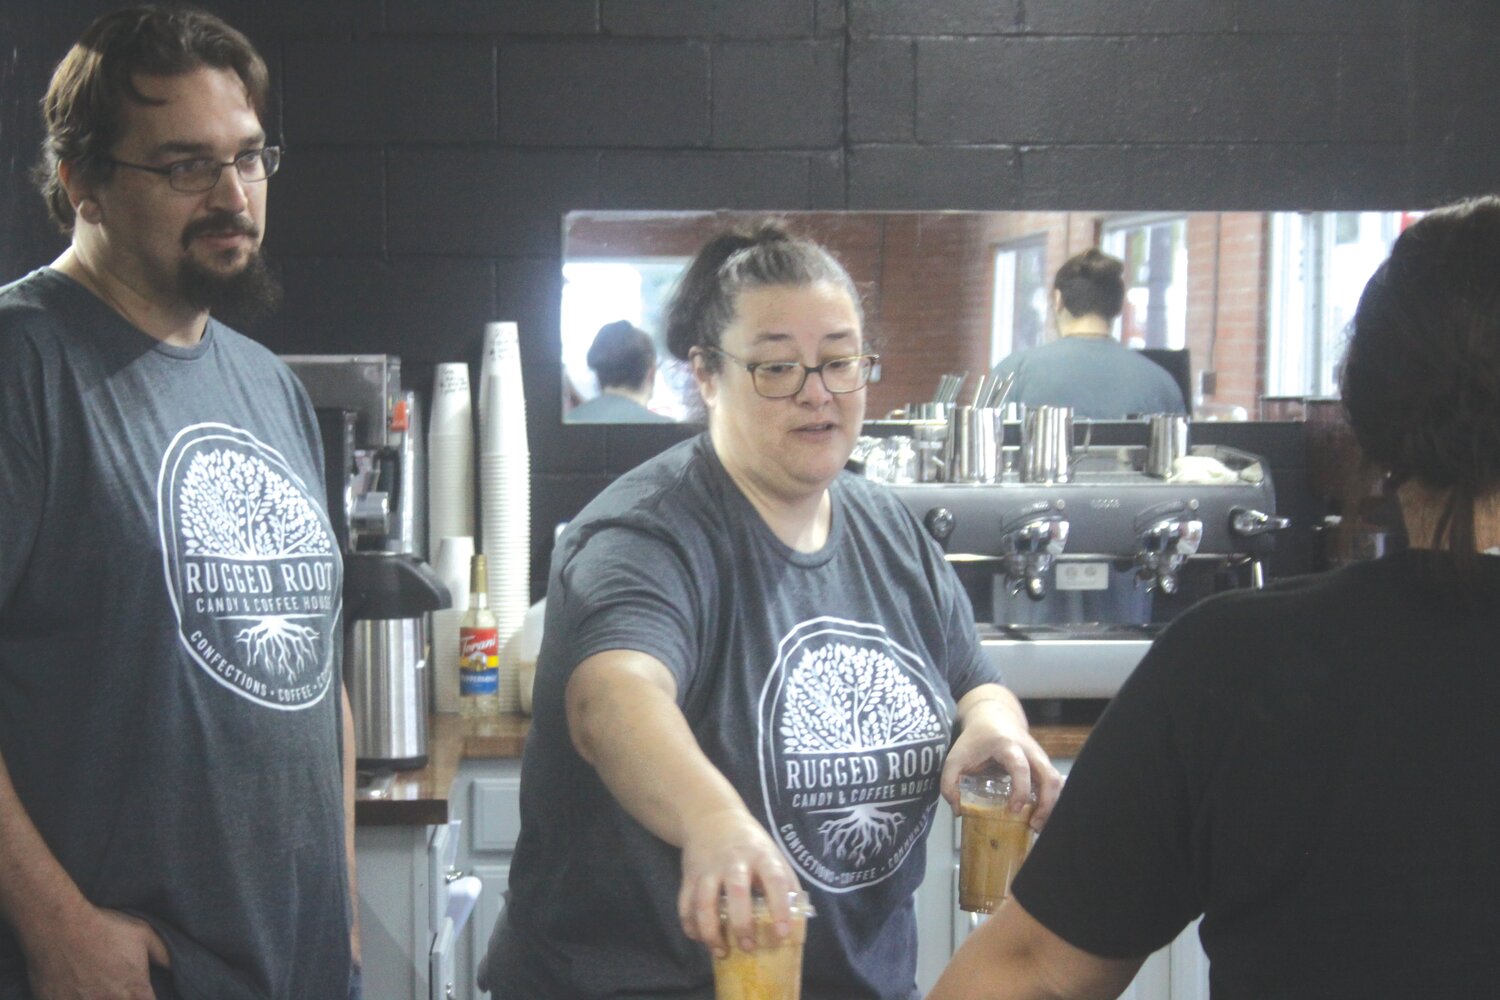 Tom and Mariah Harner hand a customer a cup of coffee on Sept. 12 at their new store, Rugged Root Candy & Coffee House in Montgomery City, which opened for business on Sept. 8.